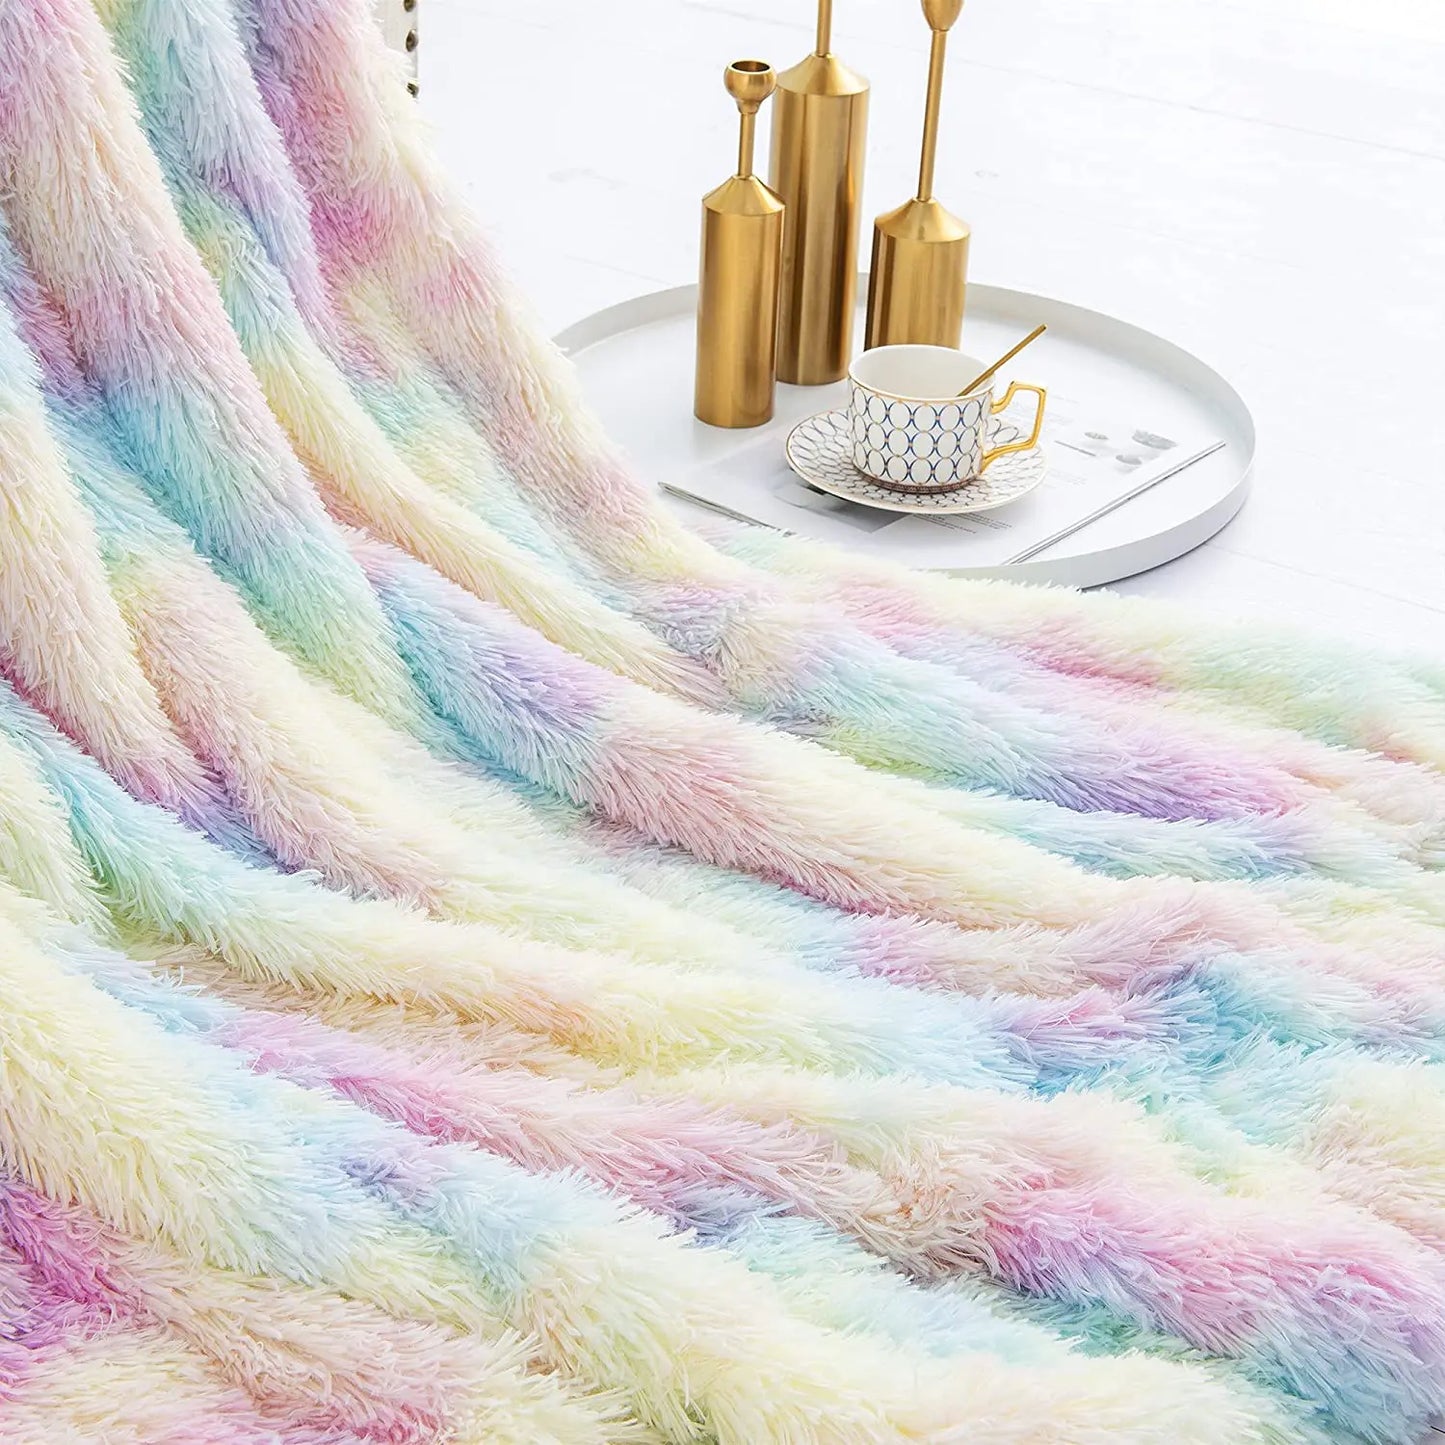 Rainbow Dreams: Soft & Fuzzy Throw Blanket for Girls – Perfect for Couch, Sofa, or Bed! Colourful, Lightweight, & Stylish Room Decor! - Blankets - Zanlana Design and Home Decor